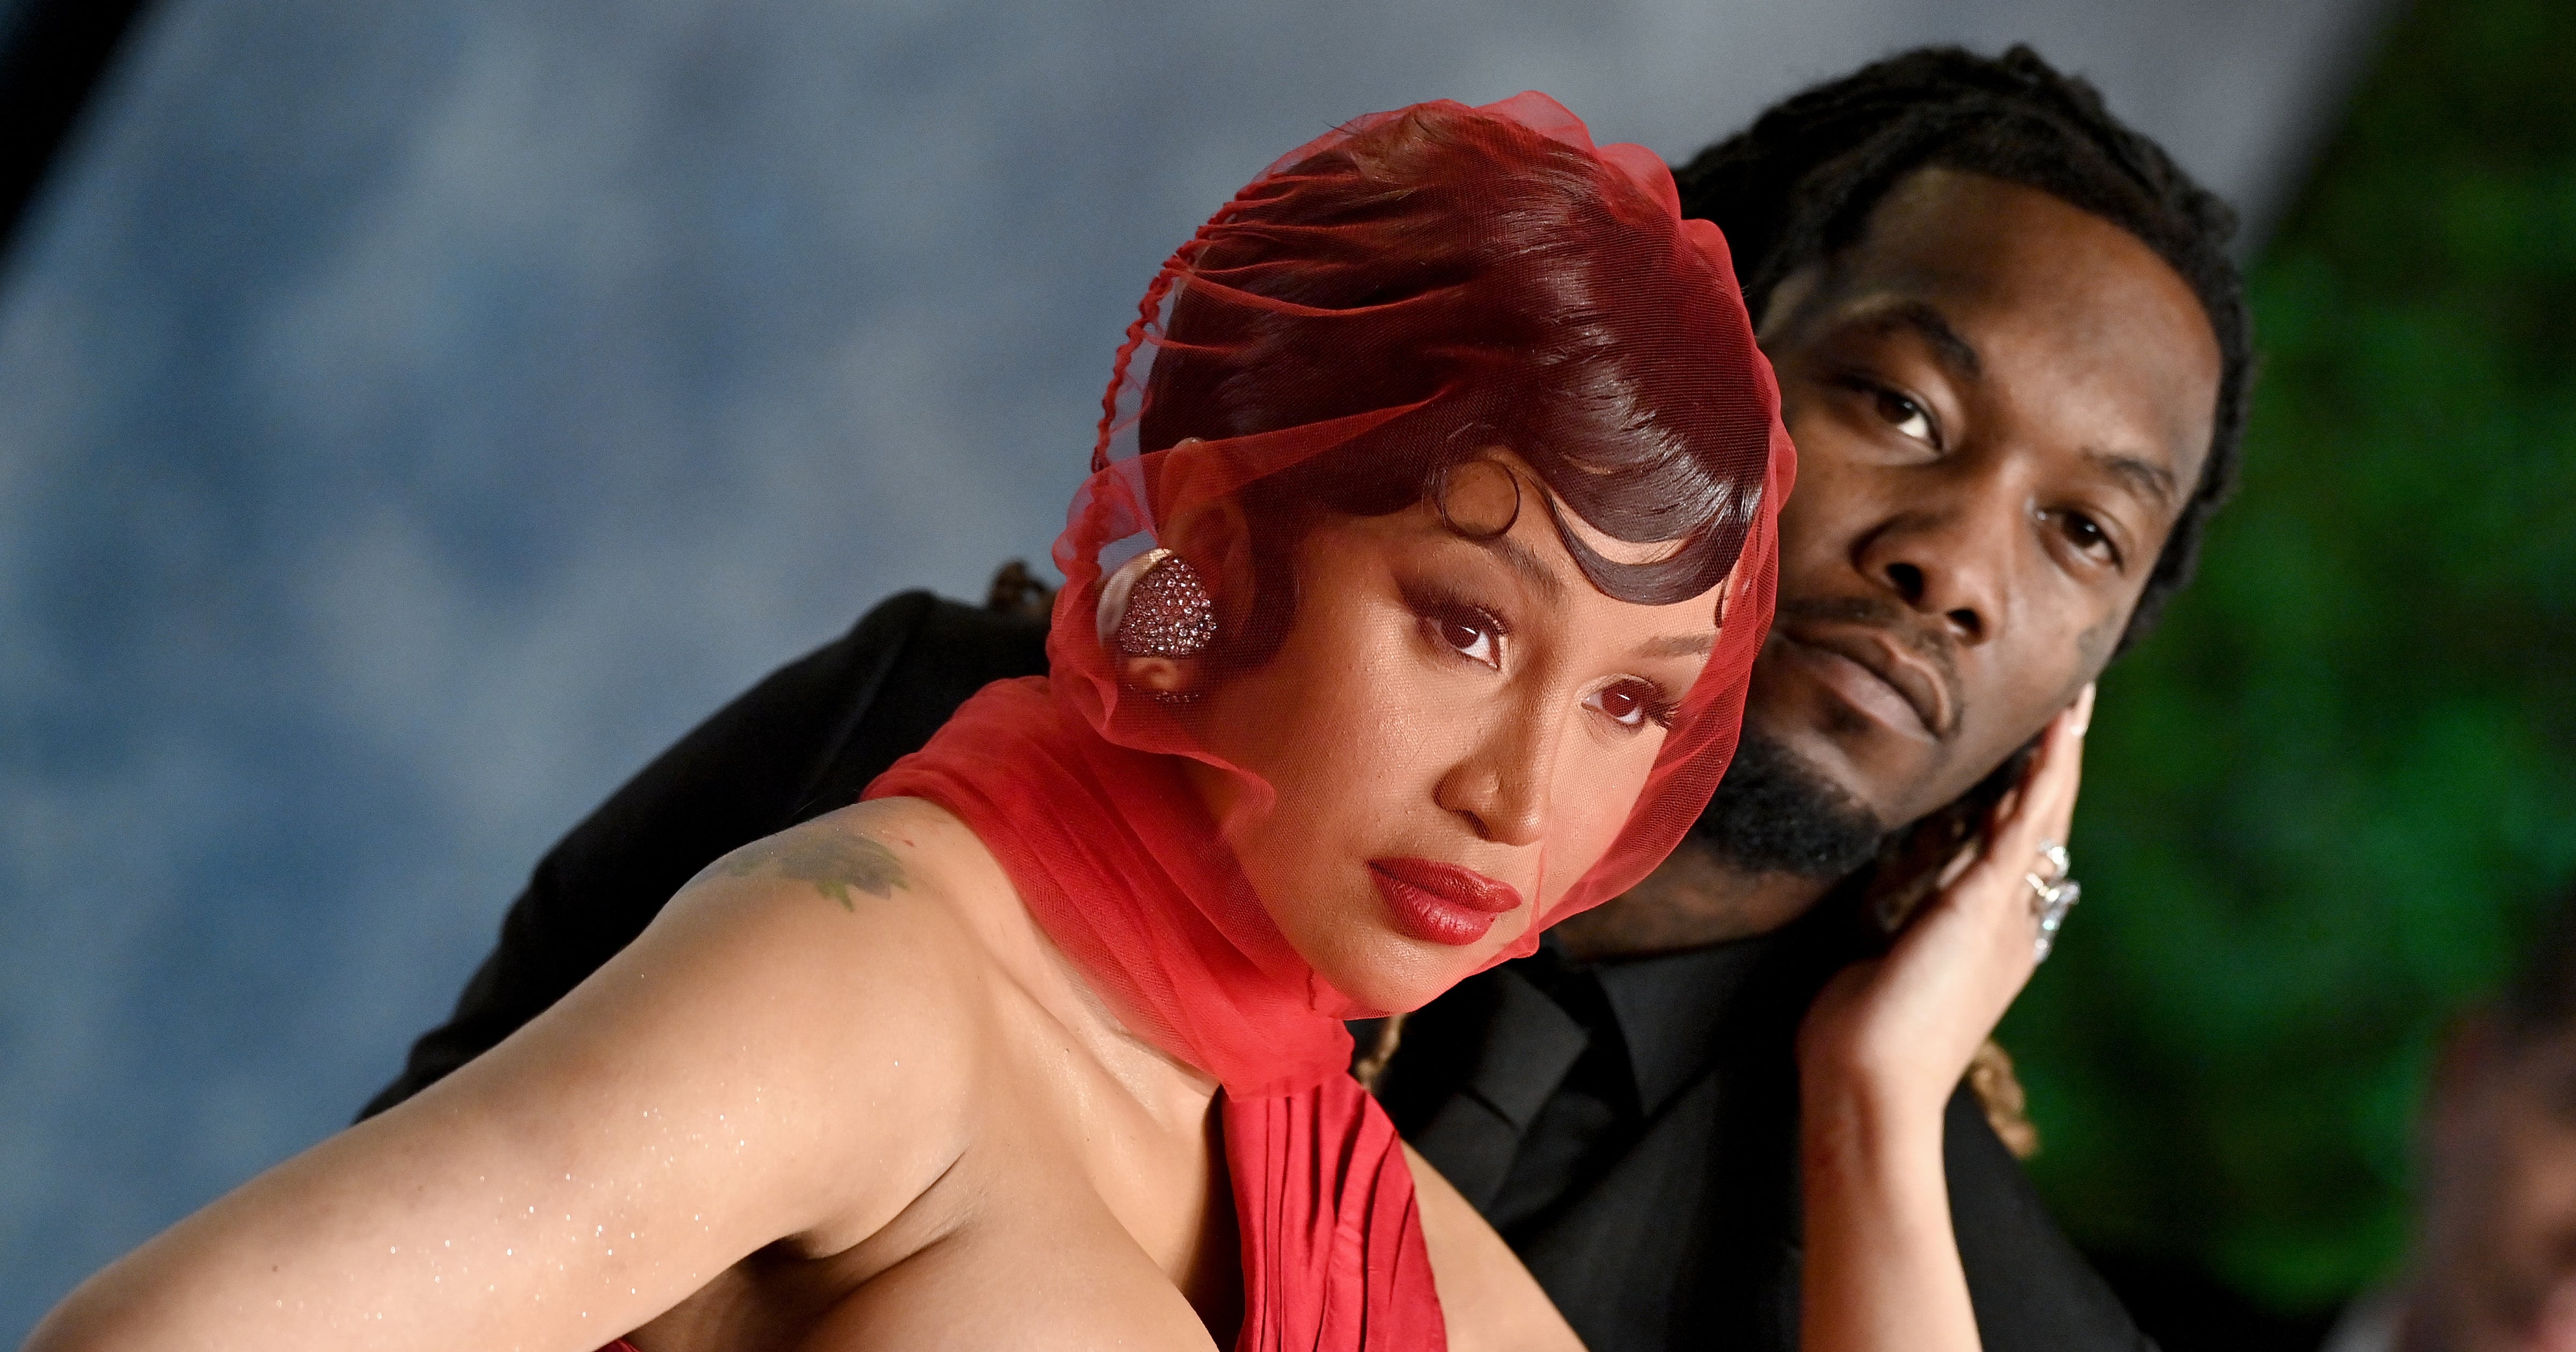 Cardi B and Offset’s Relationship Timeline Proves They’ve Stuck Together Through Thick and Thin